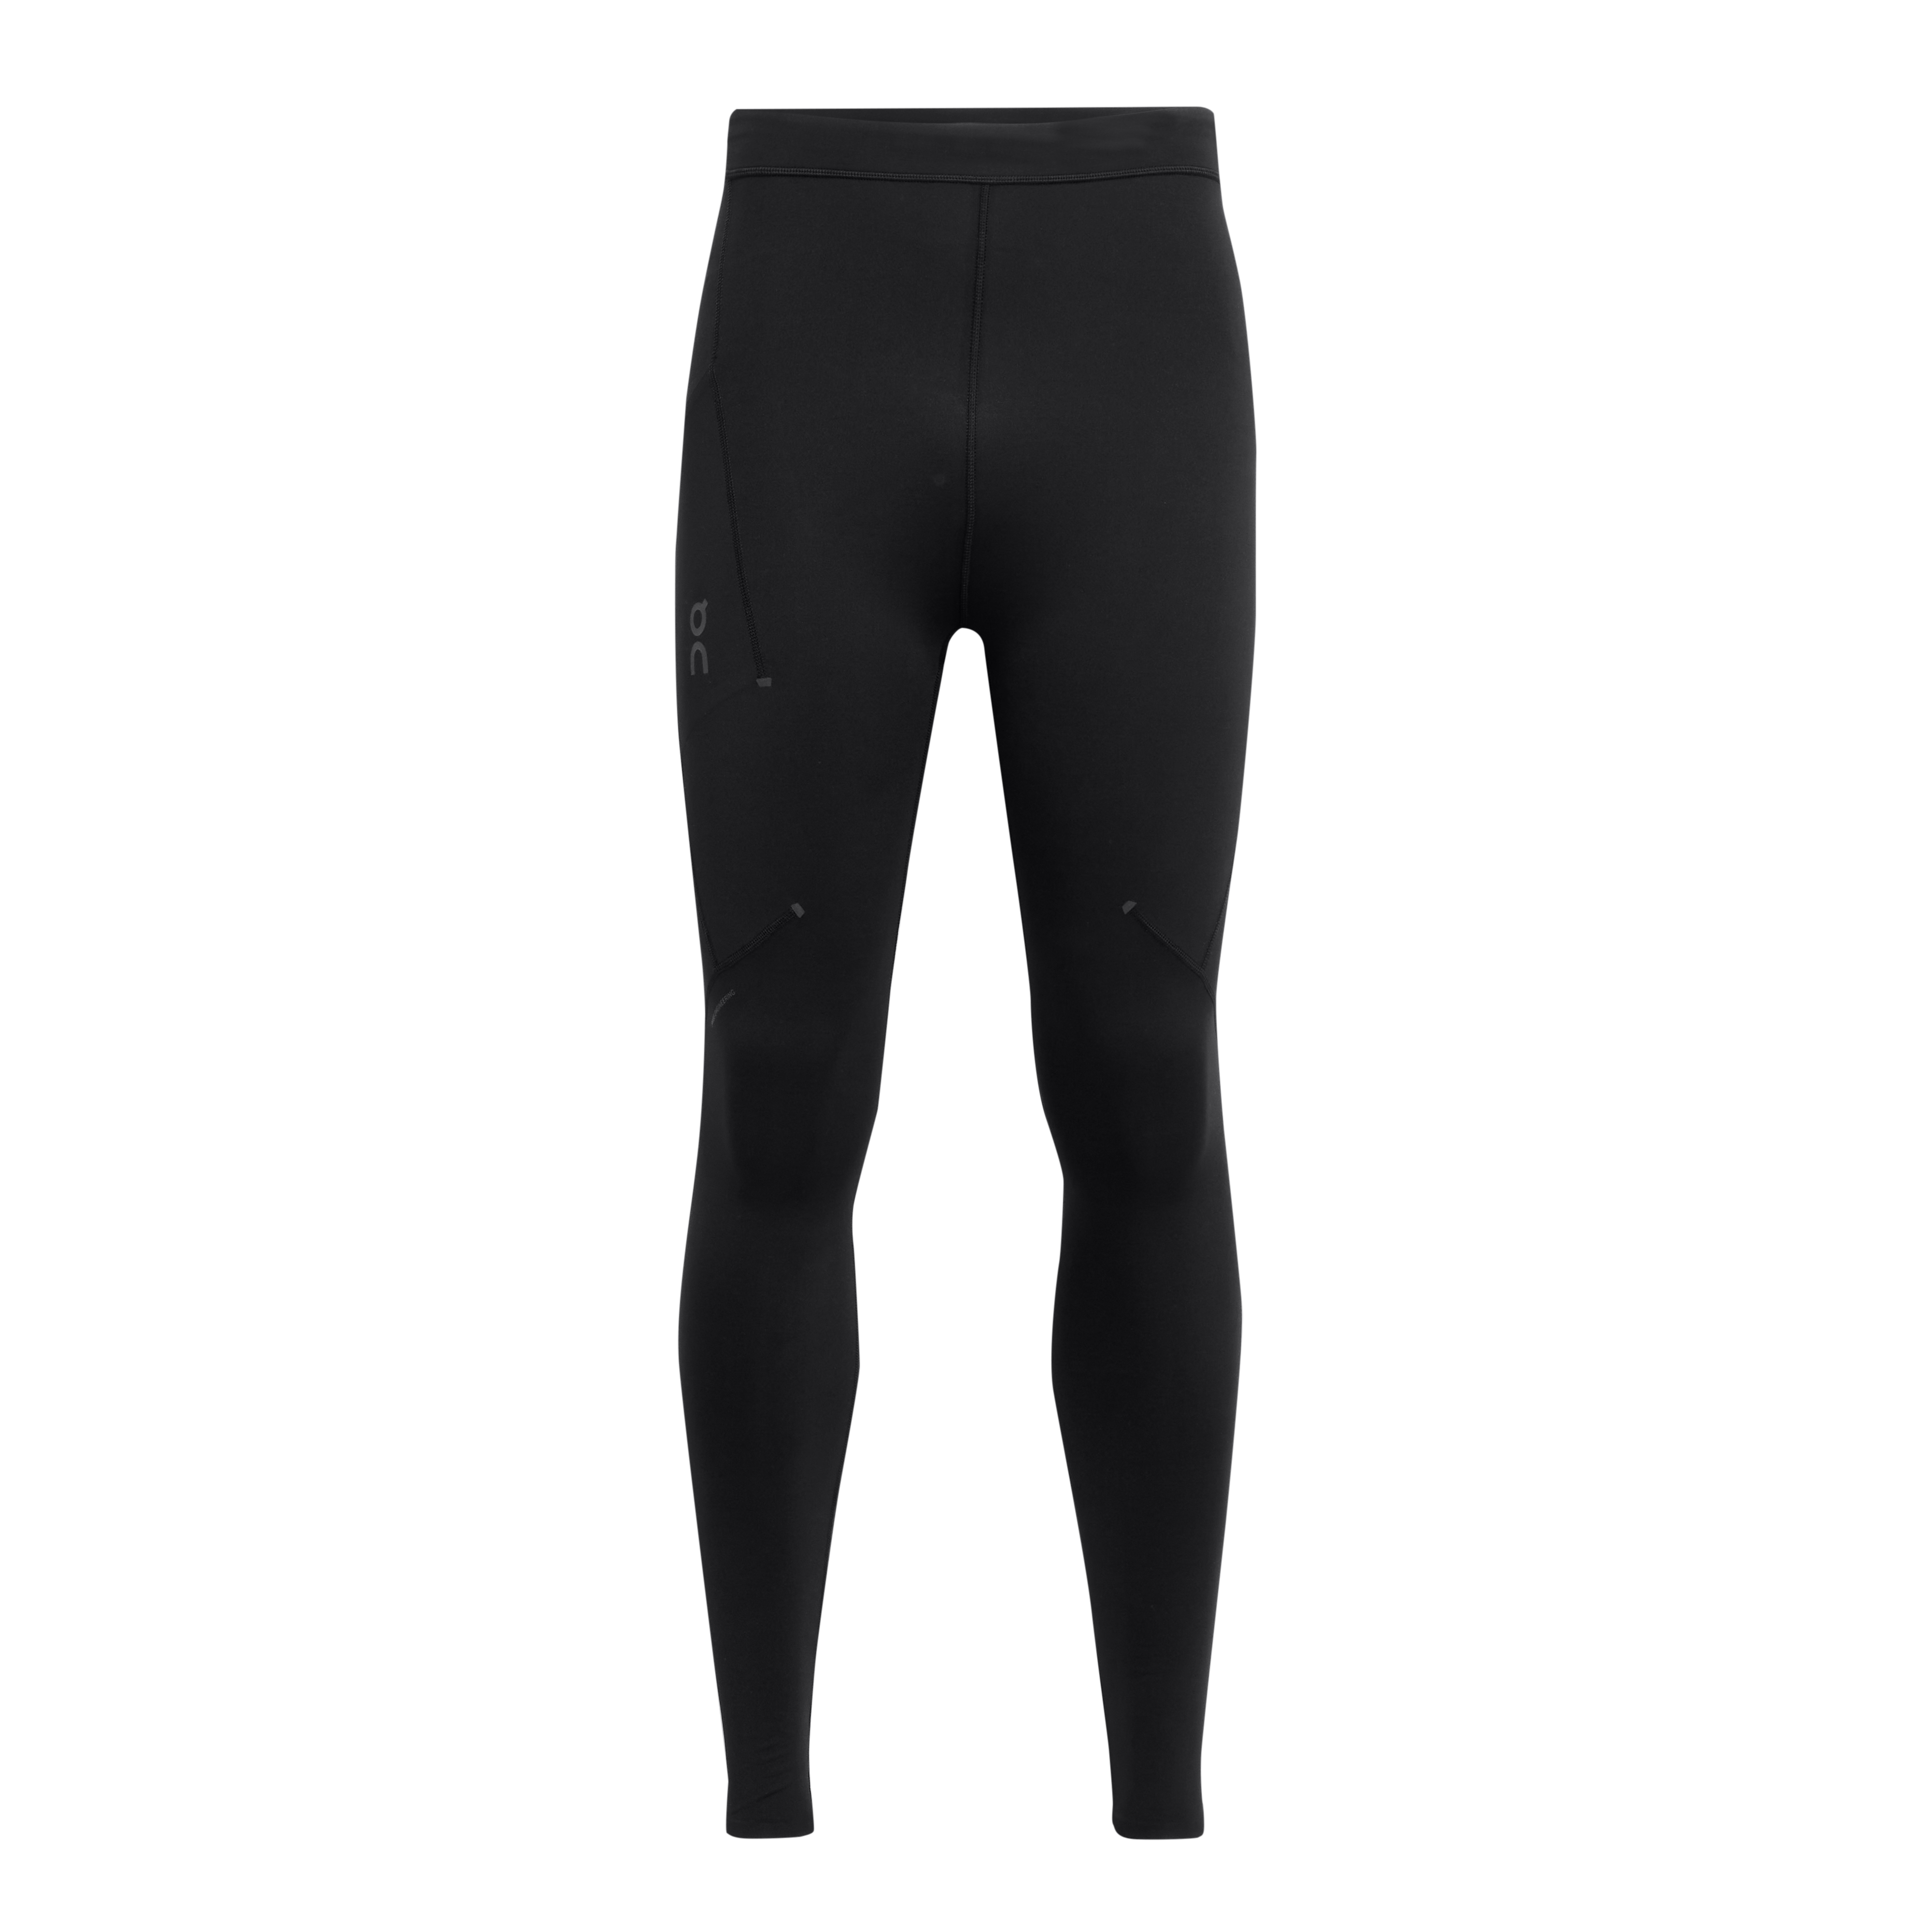  Men's Elite Design Winter Thermal Running Tights Long Pants  with Ankle Zipper and Reflective Elements Black-Blue : Clothing, Shoes &  Jewelry